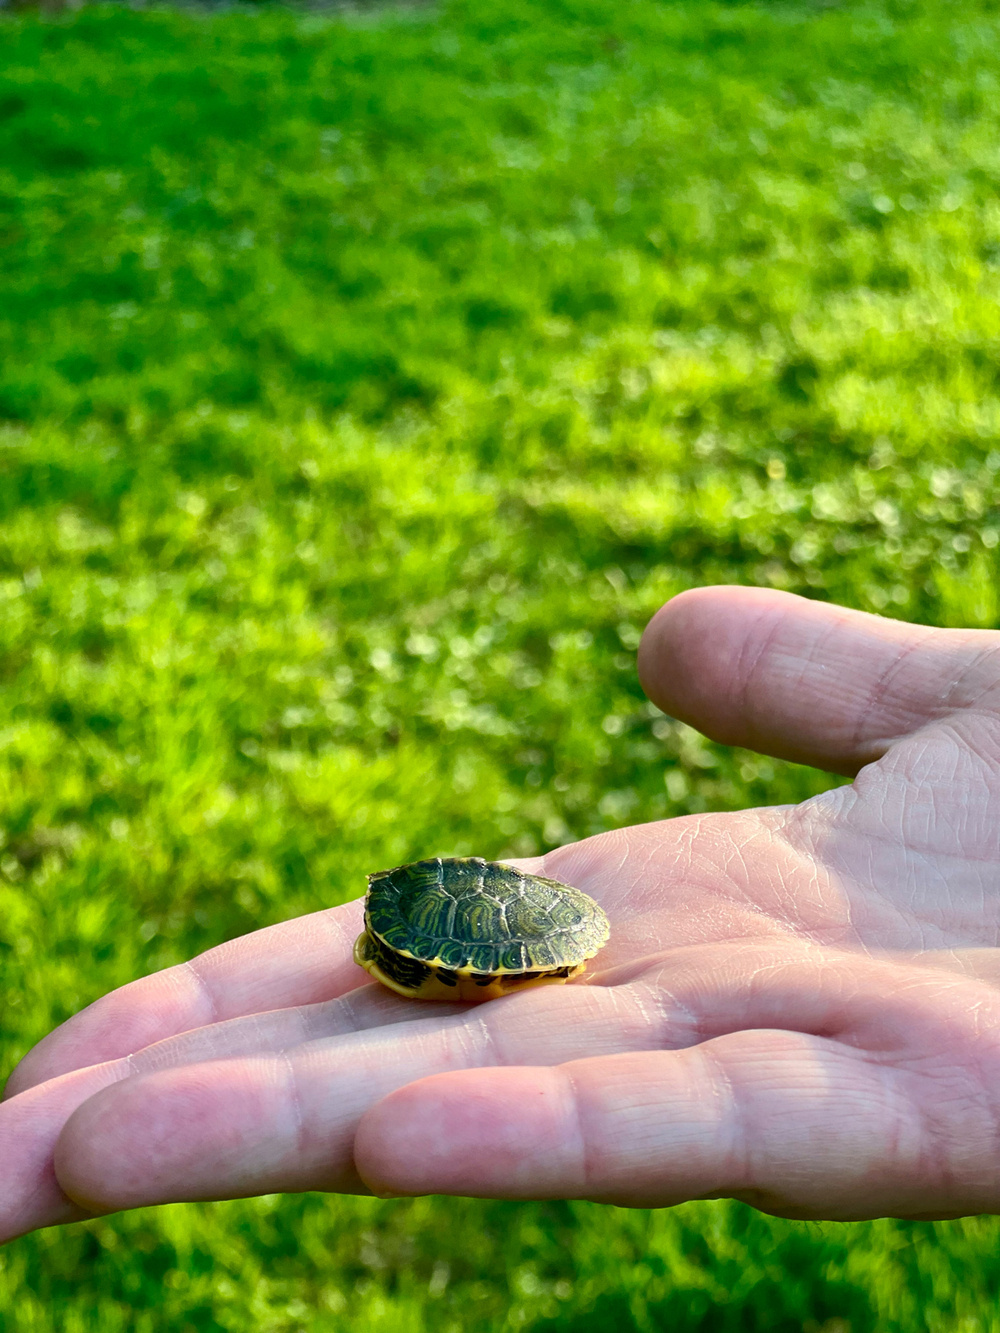 Baby Yellow-bellied turtle sitting on an opened hand. Vibrant green grass in the background. 